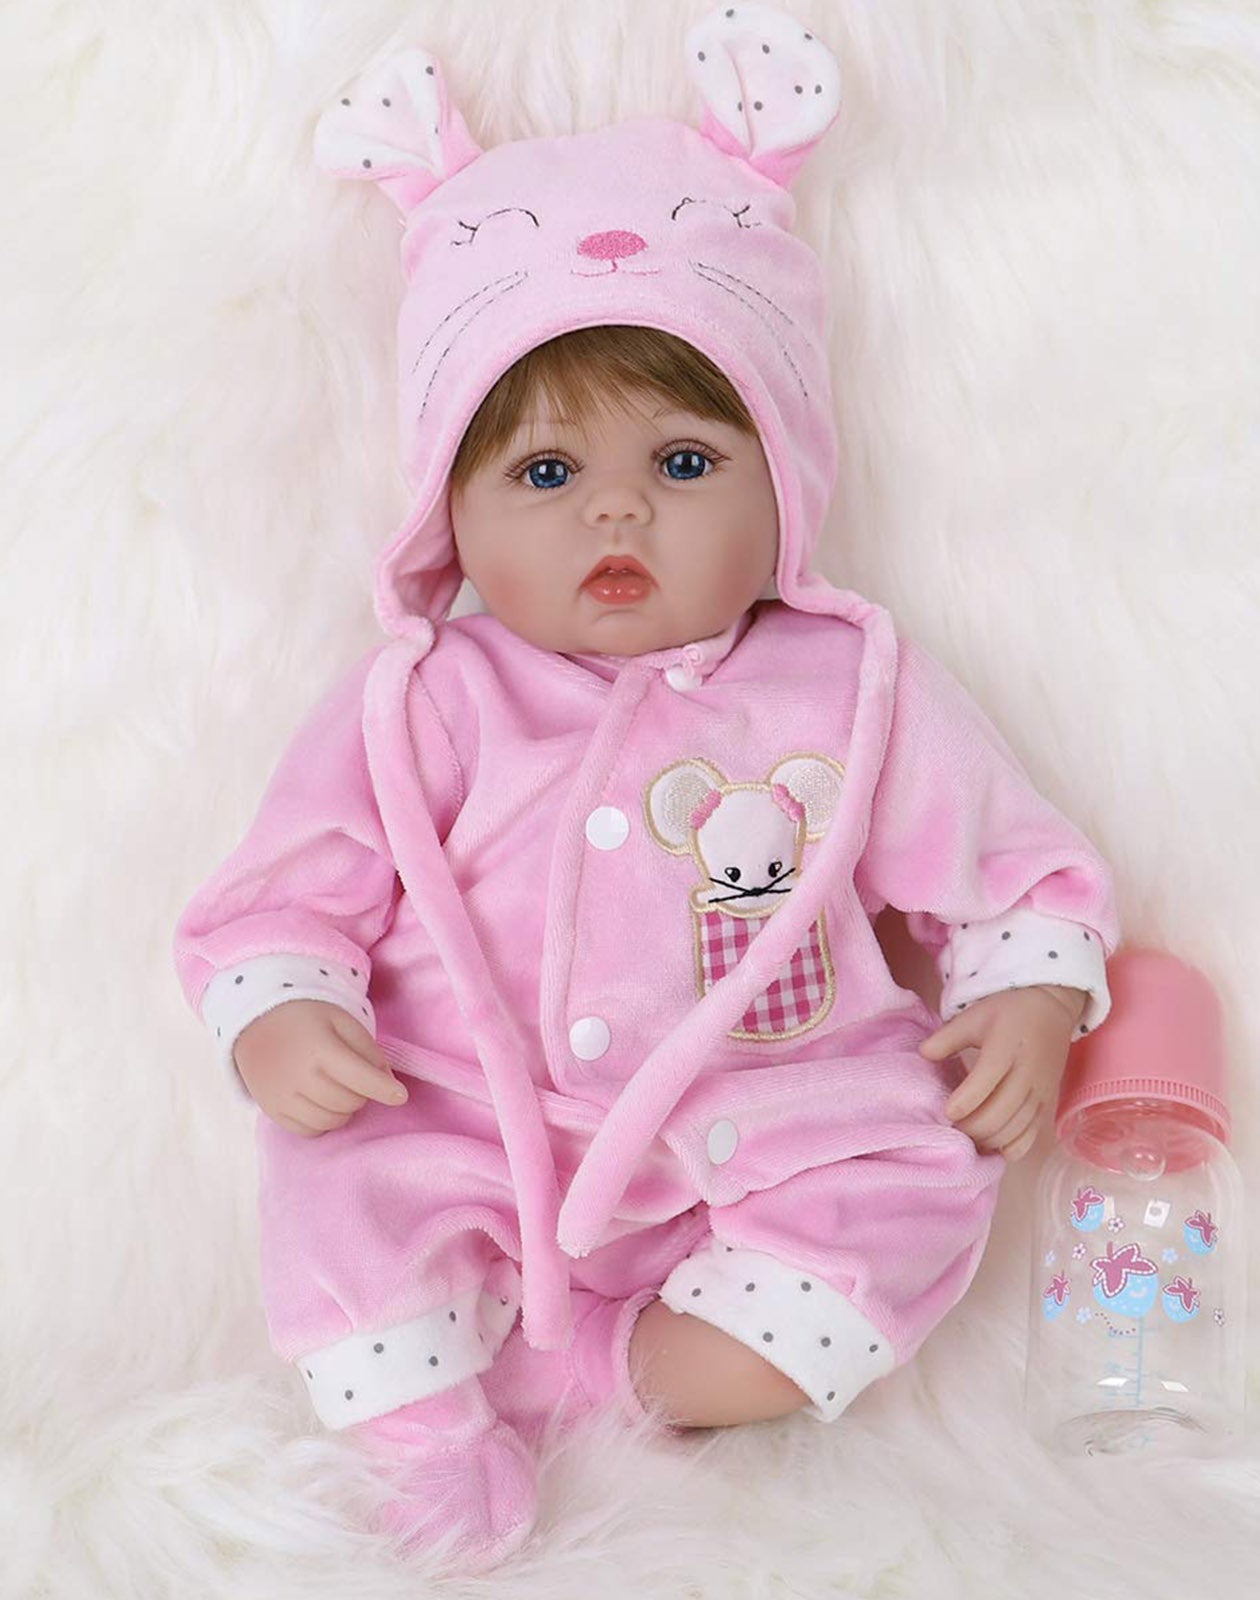 Aspasia - 22" Reborn Baby Dolls Cute Toddlers Girl with Chubby Hands